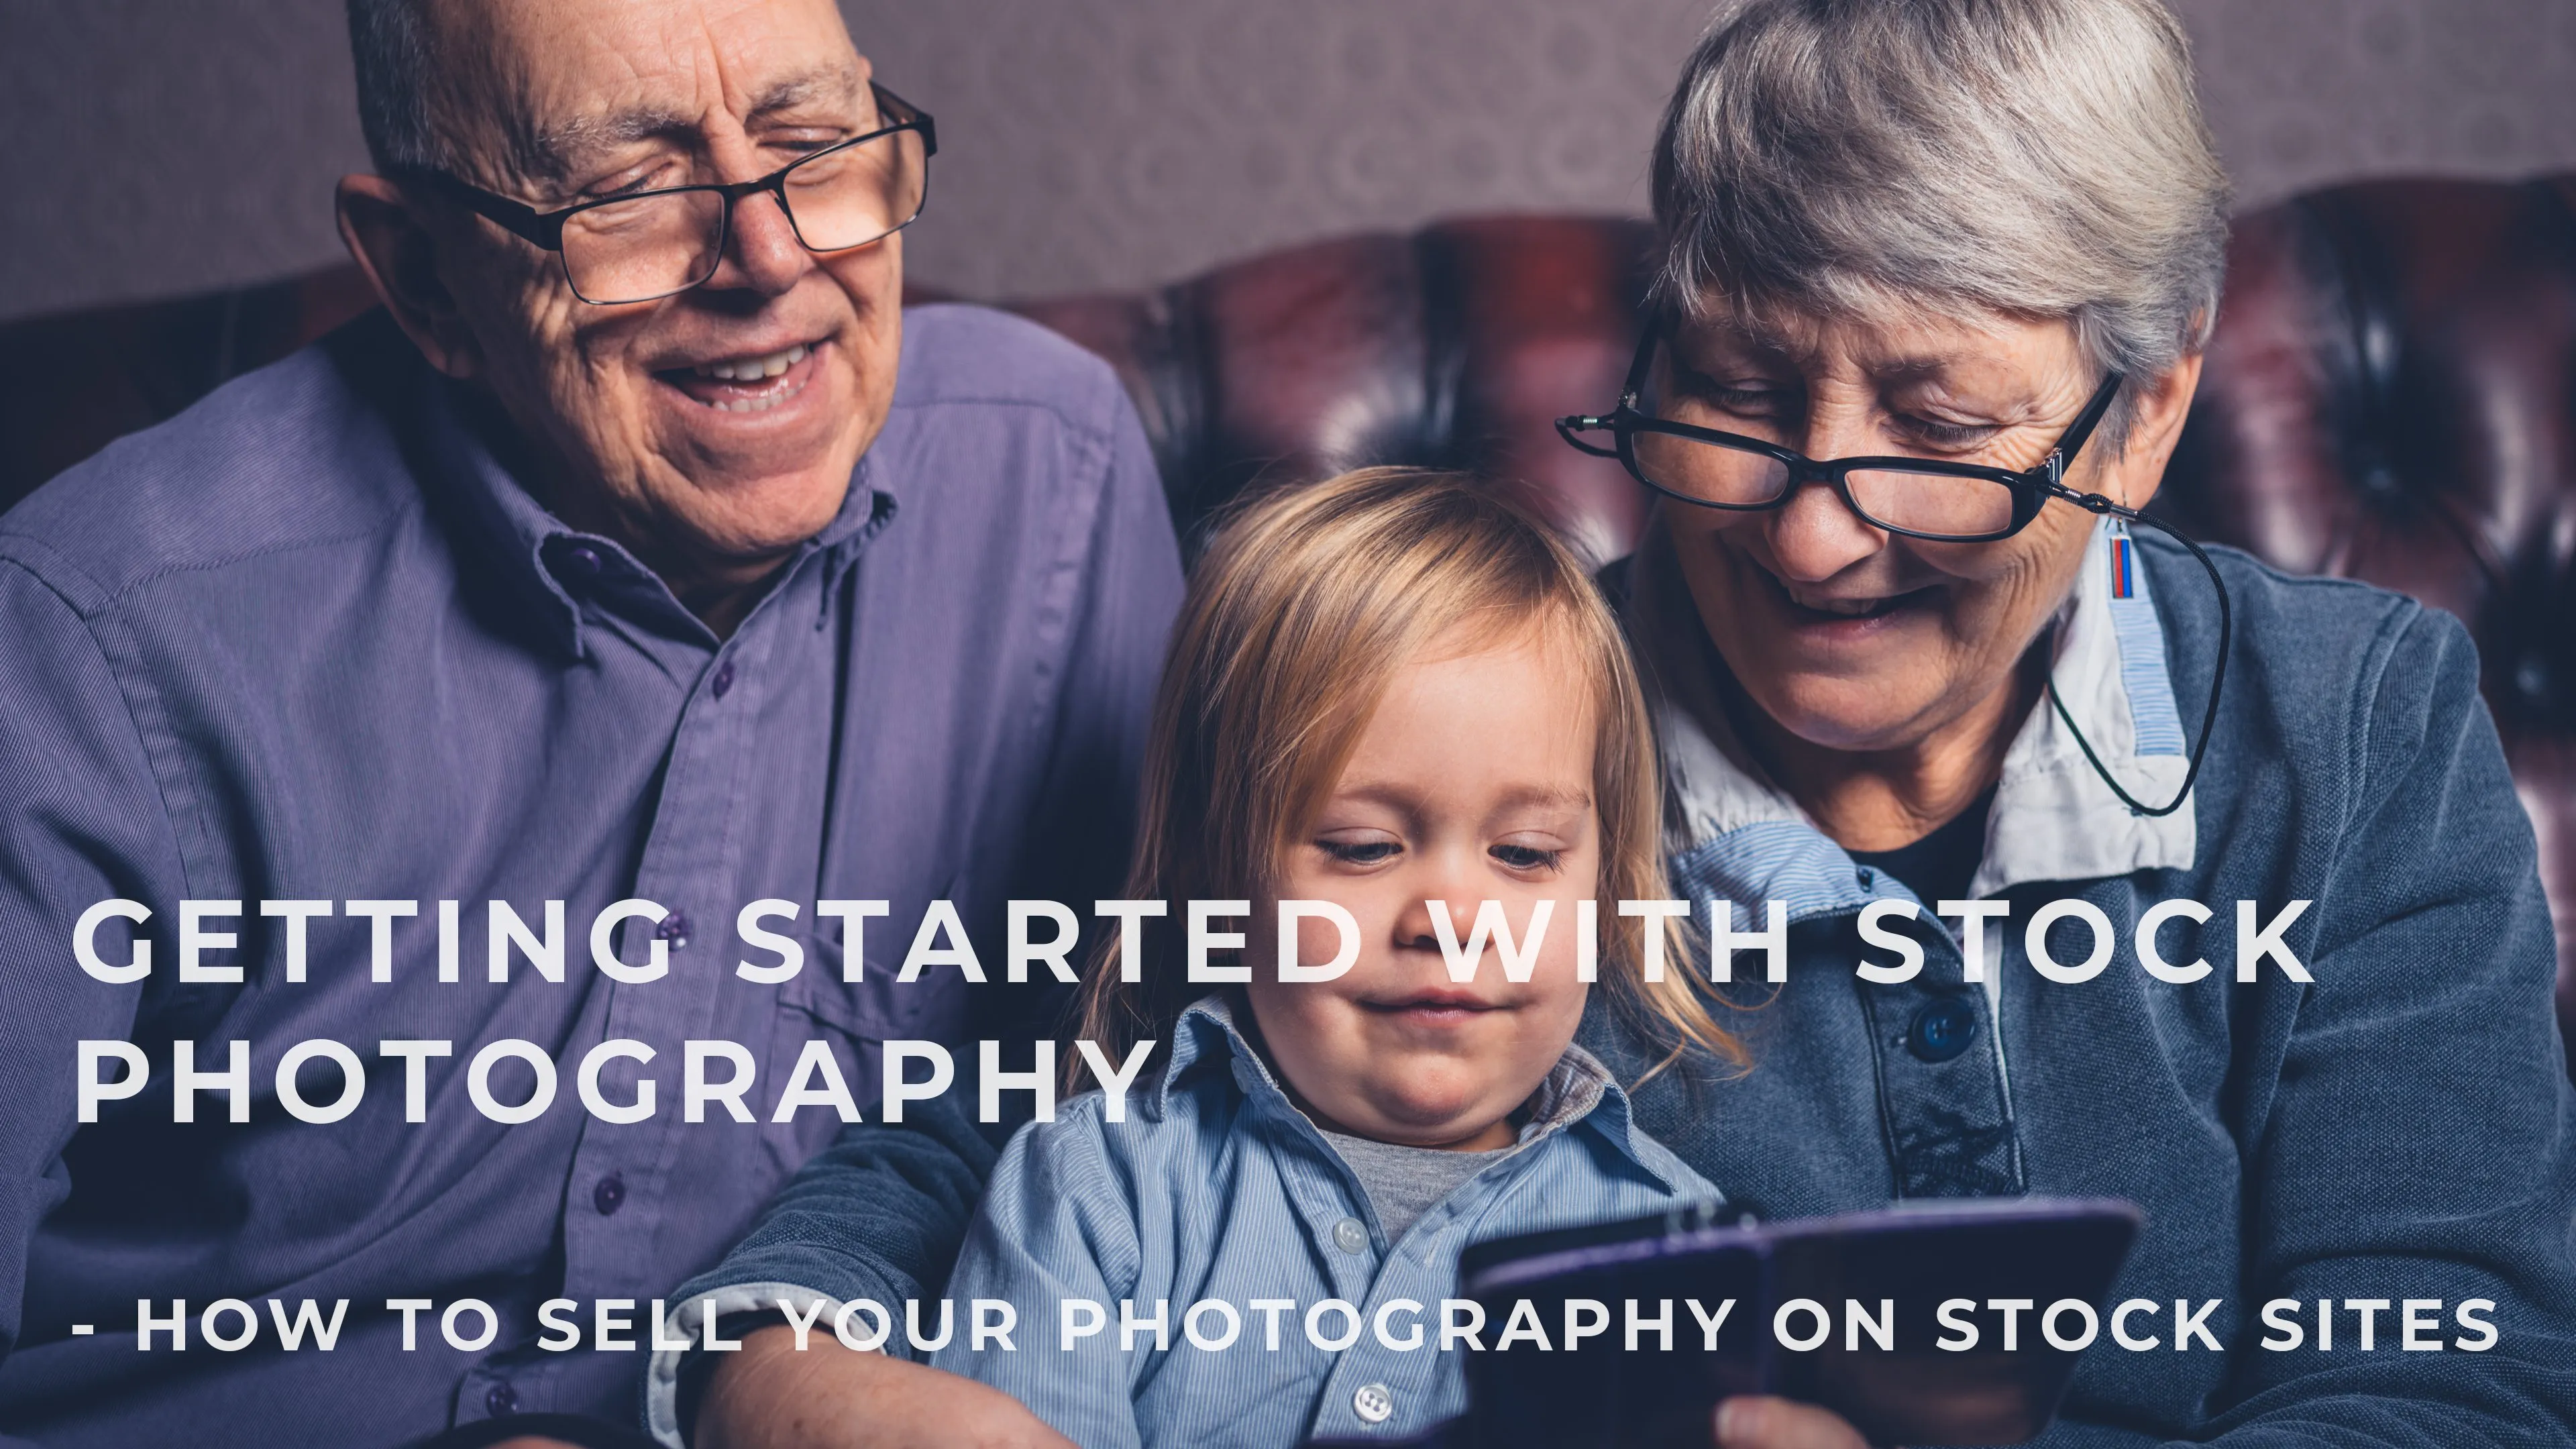 Beginning Stock Photography: Boost Your Income by Selling Photos Online